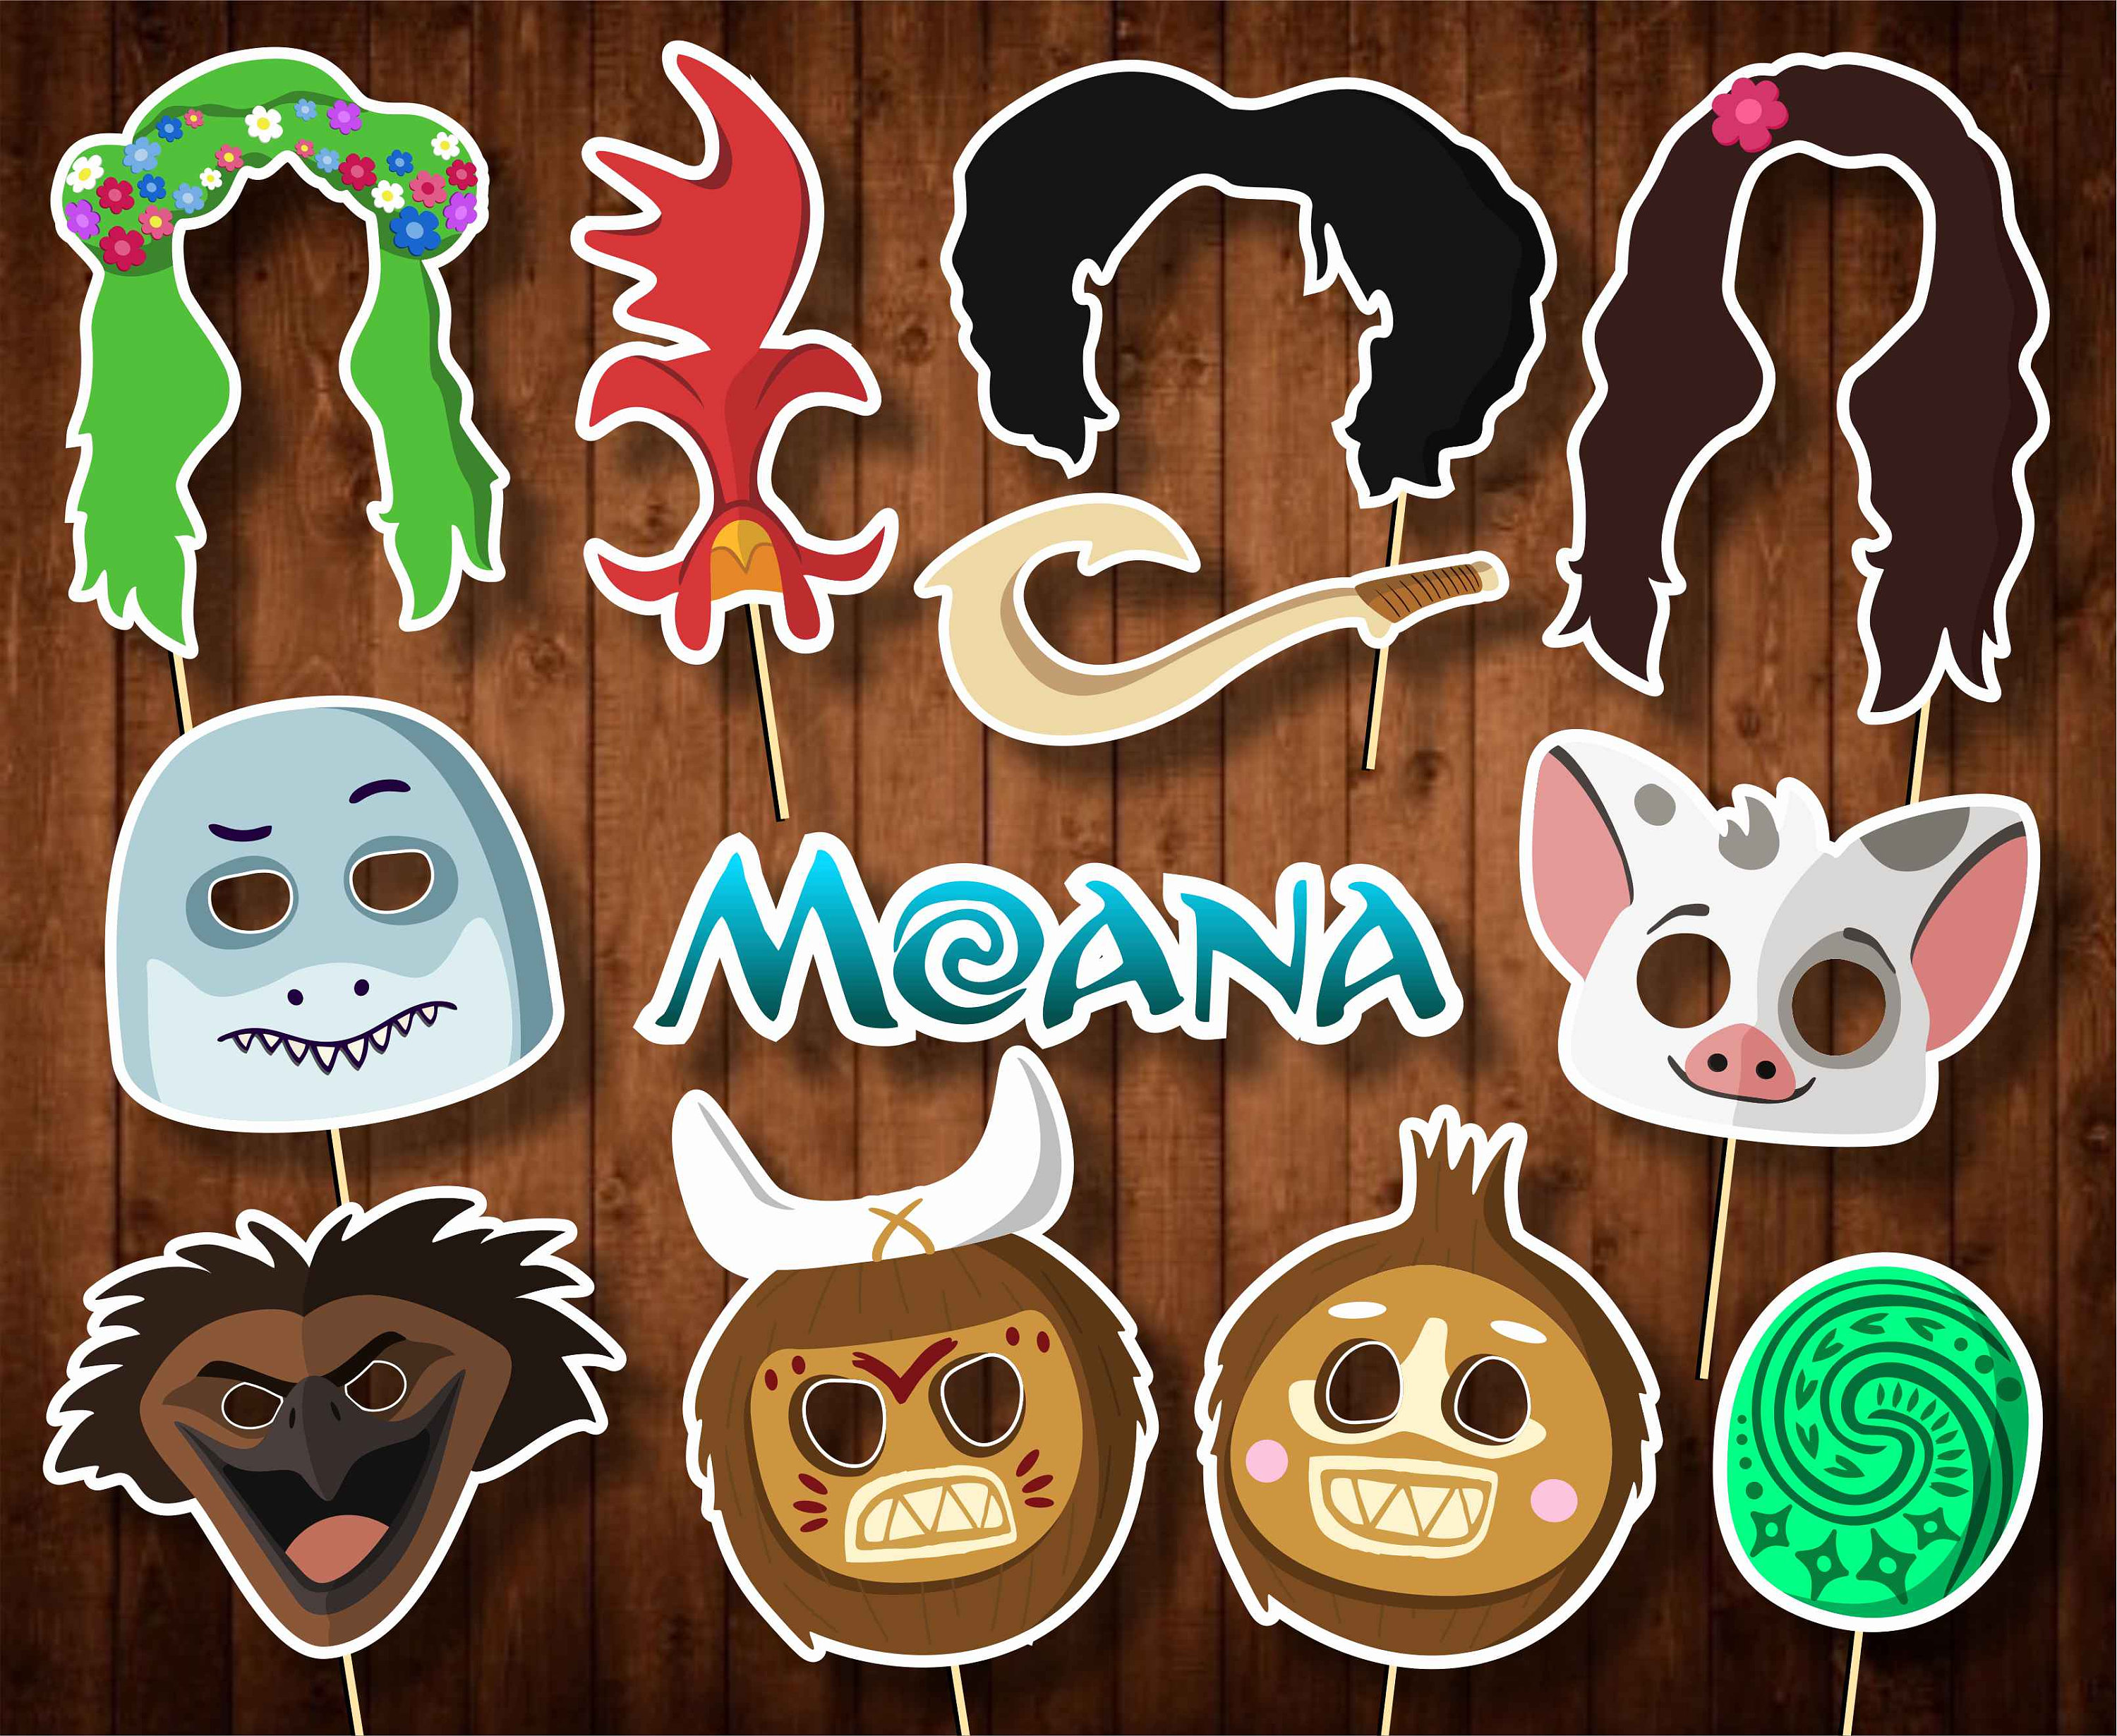 moana-photo-booth-props-printable-party-decorations-birthday-etsy